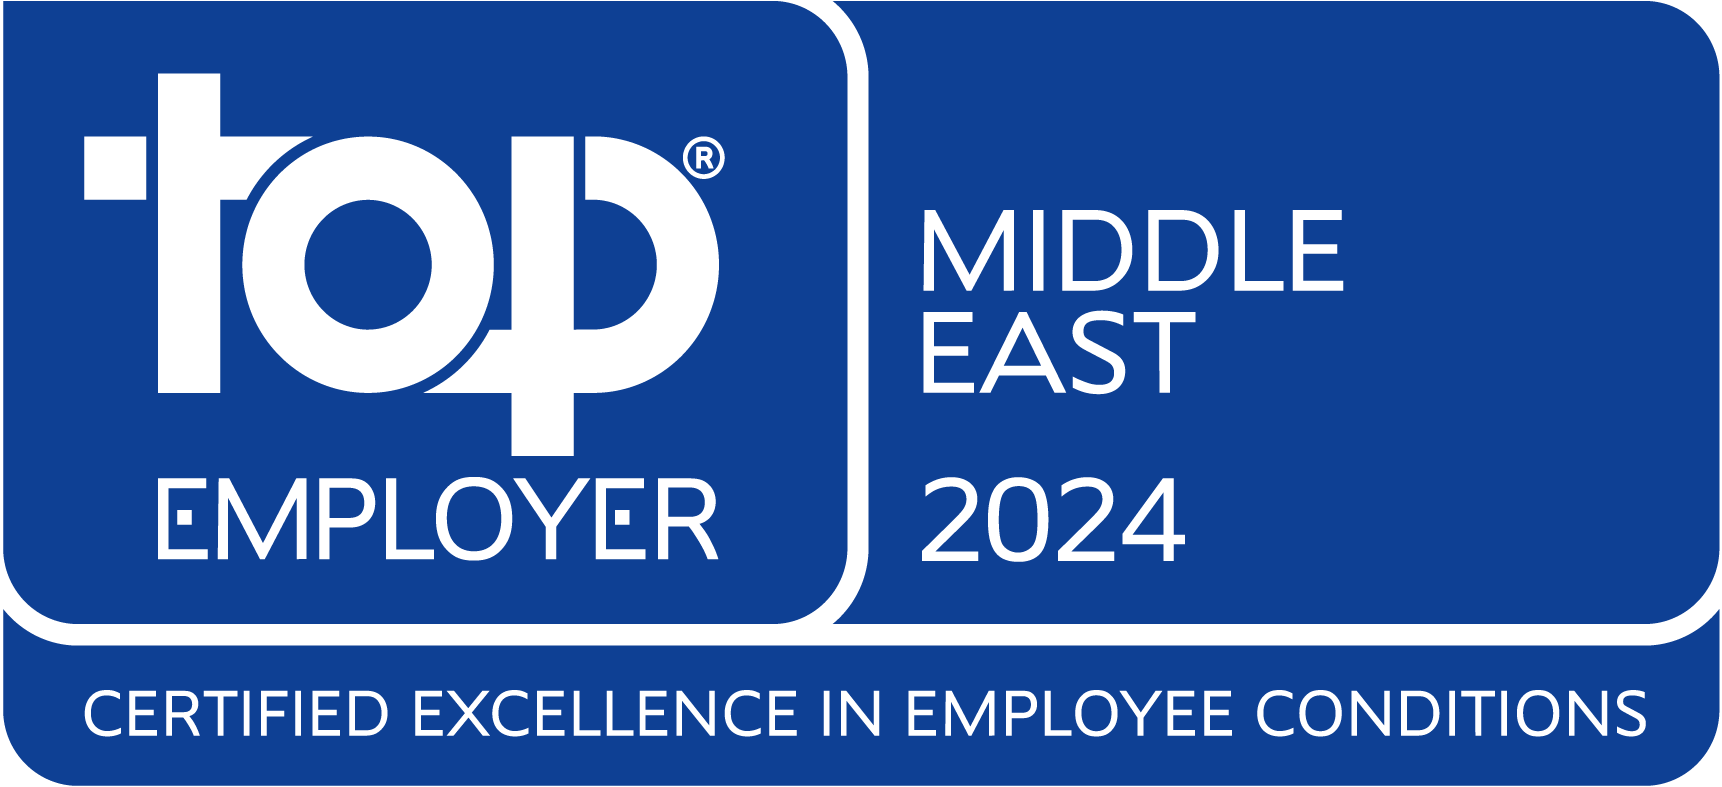 Top Employer Middle East 2024